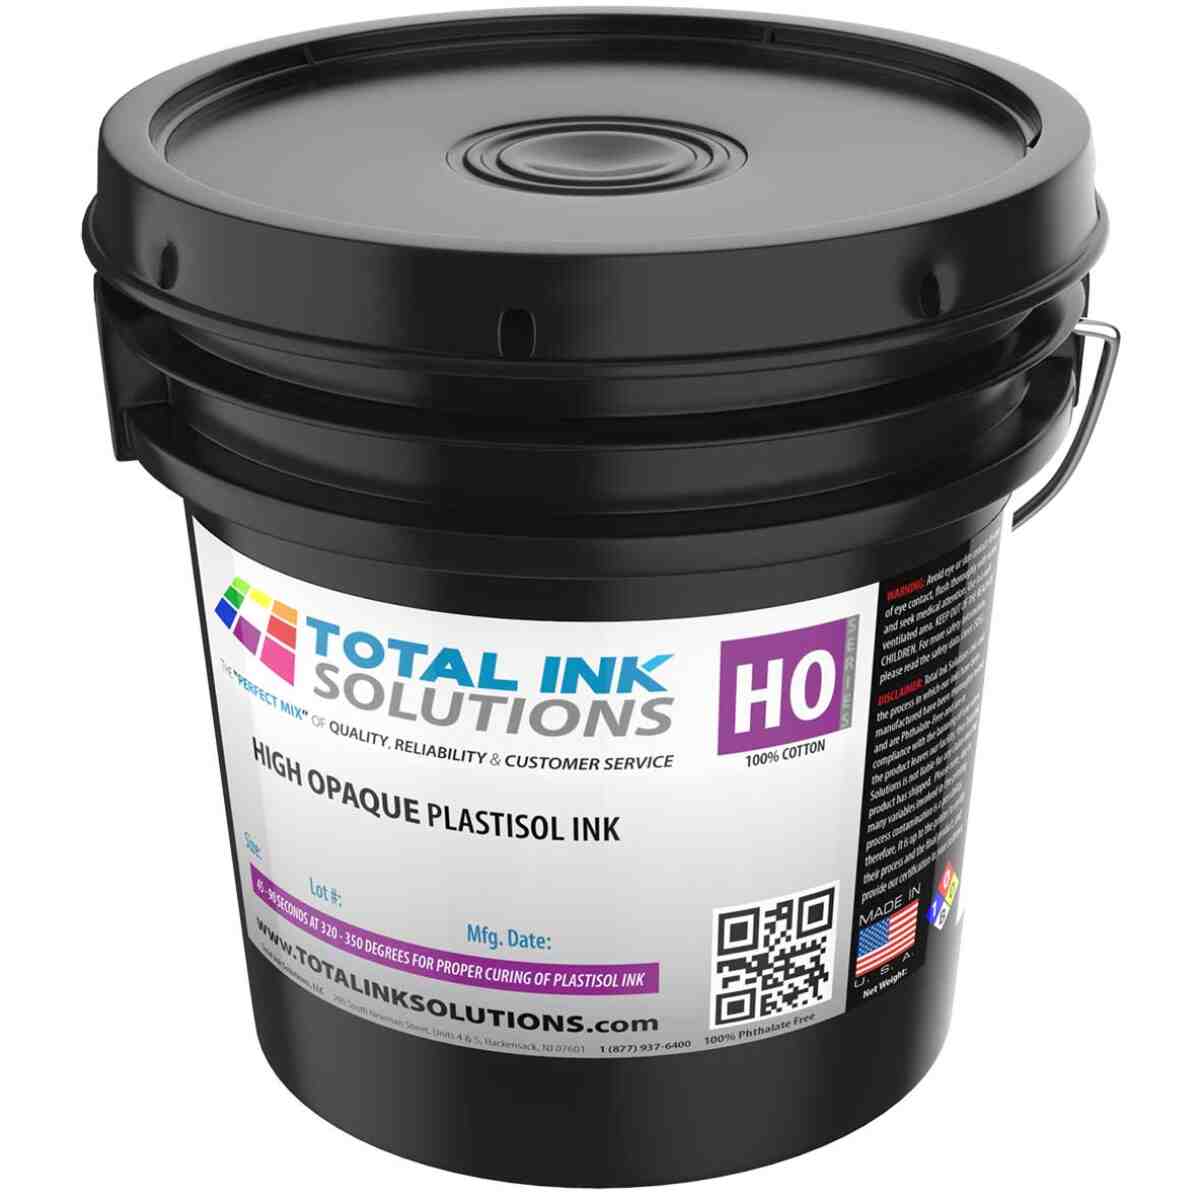 High Opaque Plastisol Ink – Gallon TOTAL INK SOLUTIONS®